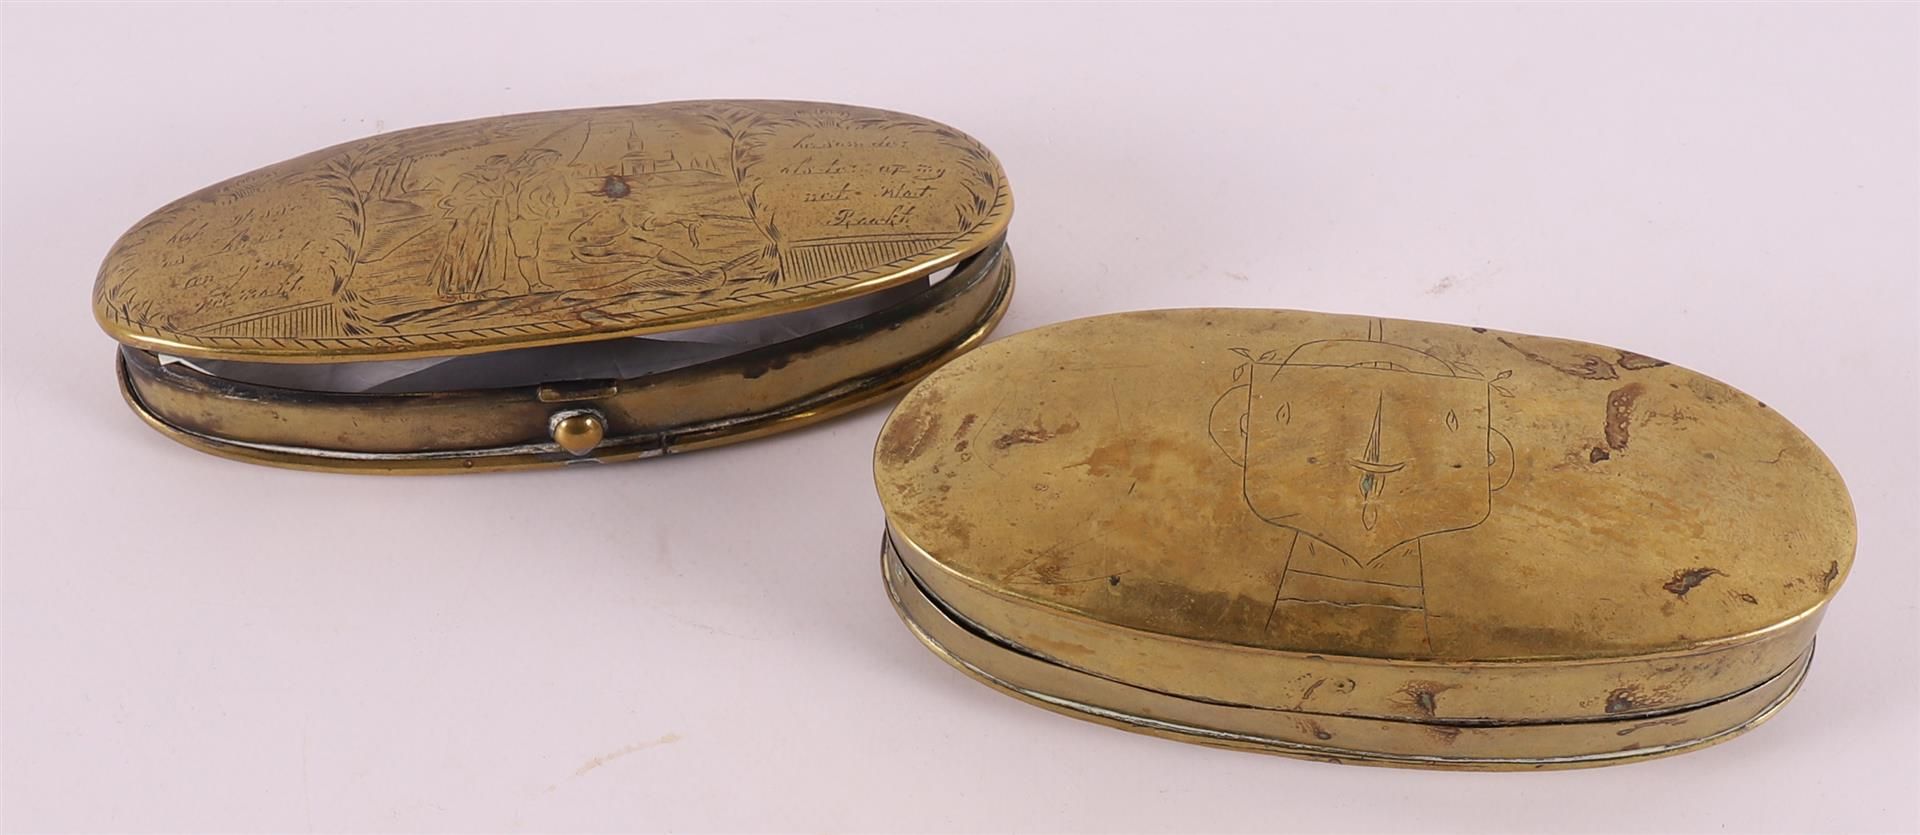 Two various brass tobacco boxes including text.